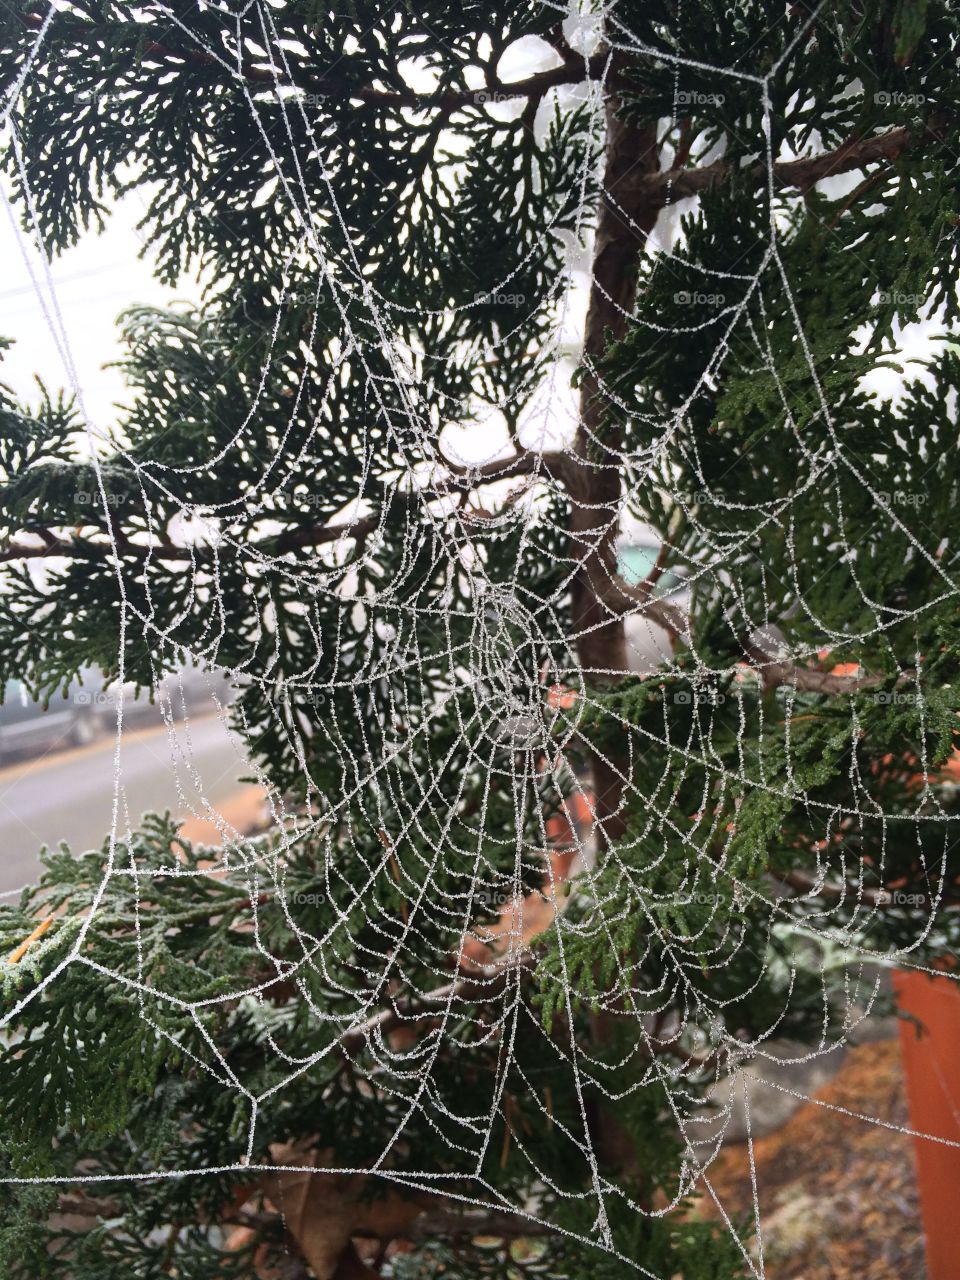 Spider web dazzled with ice 
